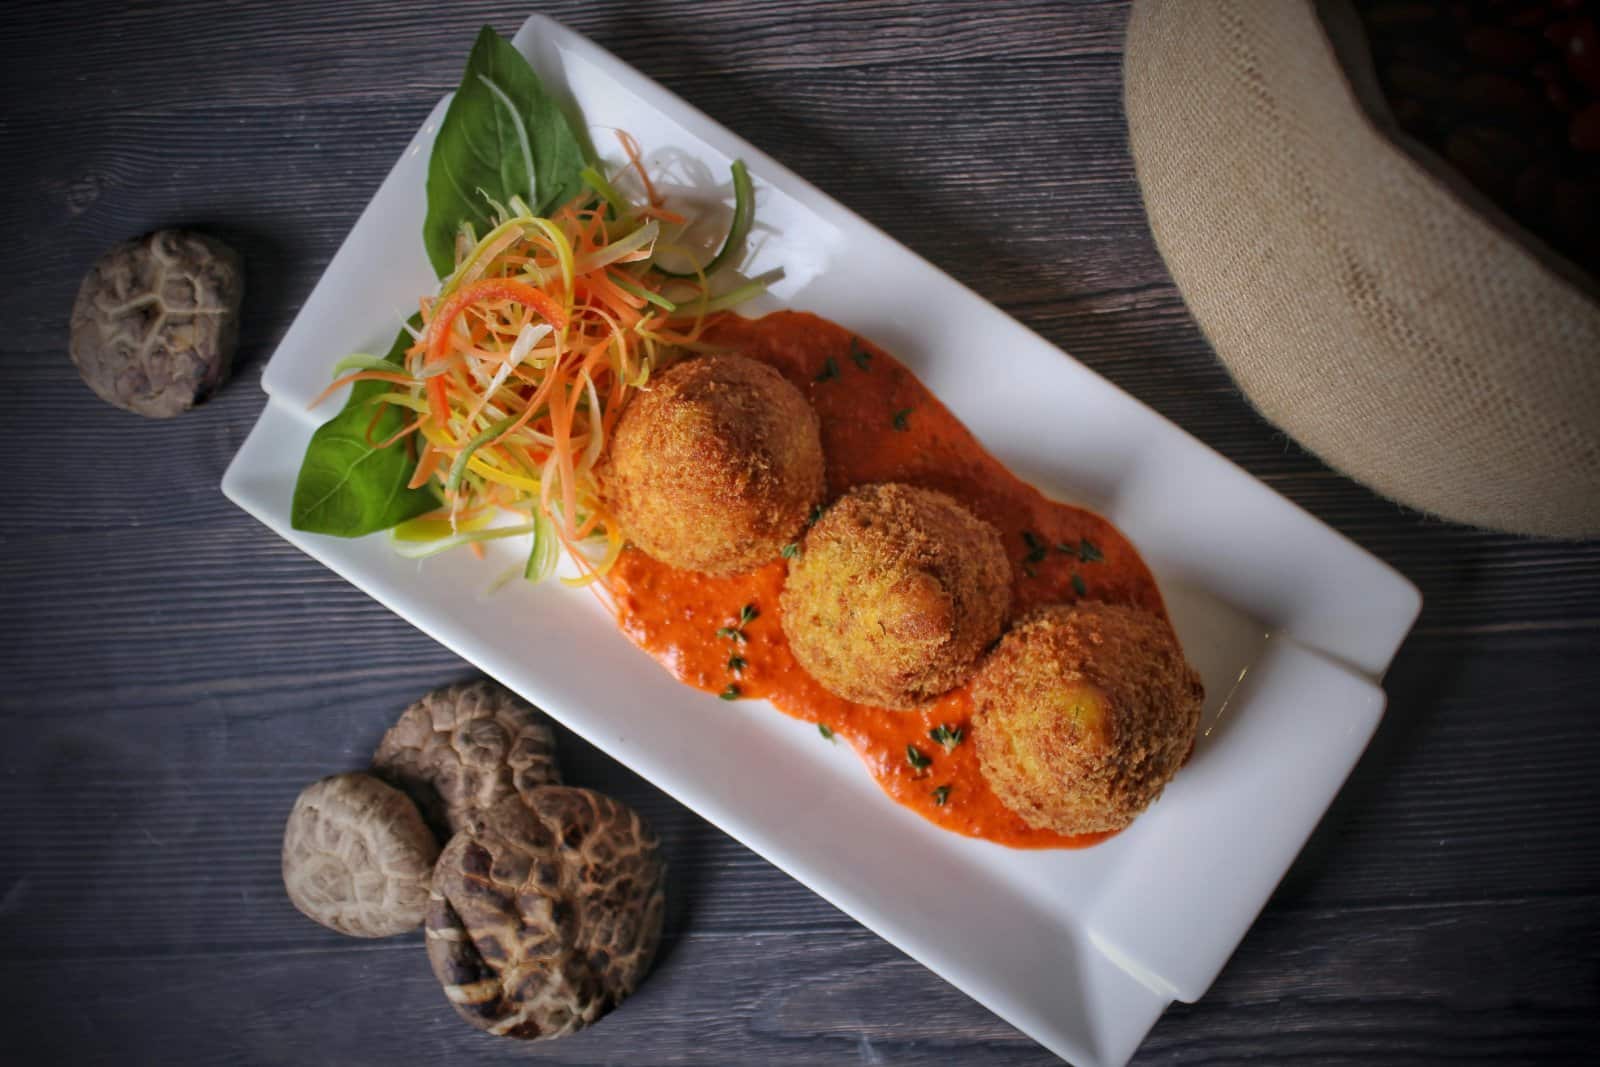 Image Credit: Pexels / Shameel mukkath <p><span>Satisfy your afternoon cravings with arancini, a Sicilian specialty that’s both delicious and satisfying. These golden orbs of goodness are made from seasoned rice, stuffed with a savory filling such as ragù (meat sauce), mozzarella, and peas, then coated in breadcrumbs and fried to perfection. Sample them in Palermo, where arancini are a beloved street food favorite, enjoyed by locals and visitors alike. Let each bite of these crispy, flavorful treats transport you to the sunny shores of Sicily, where the culinary traditions are as rich and vibrant as the island itself.</span></p>